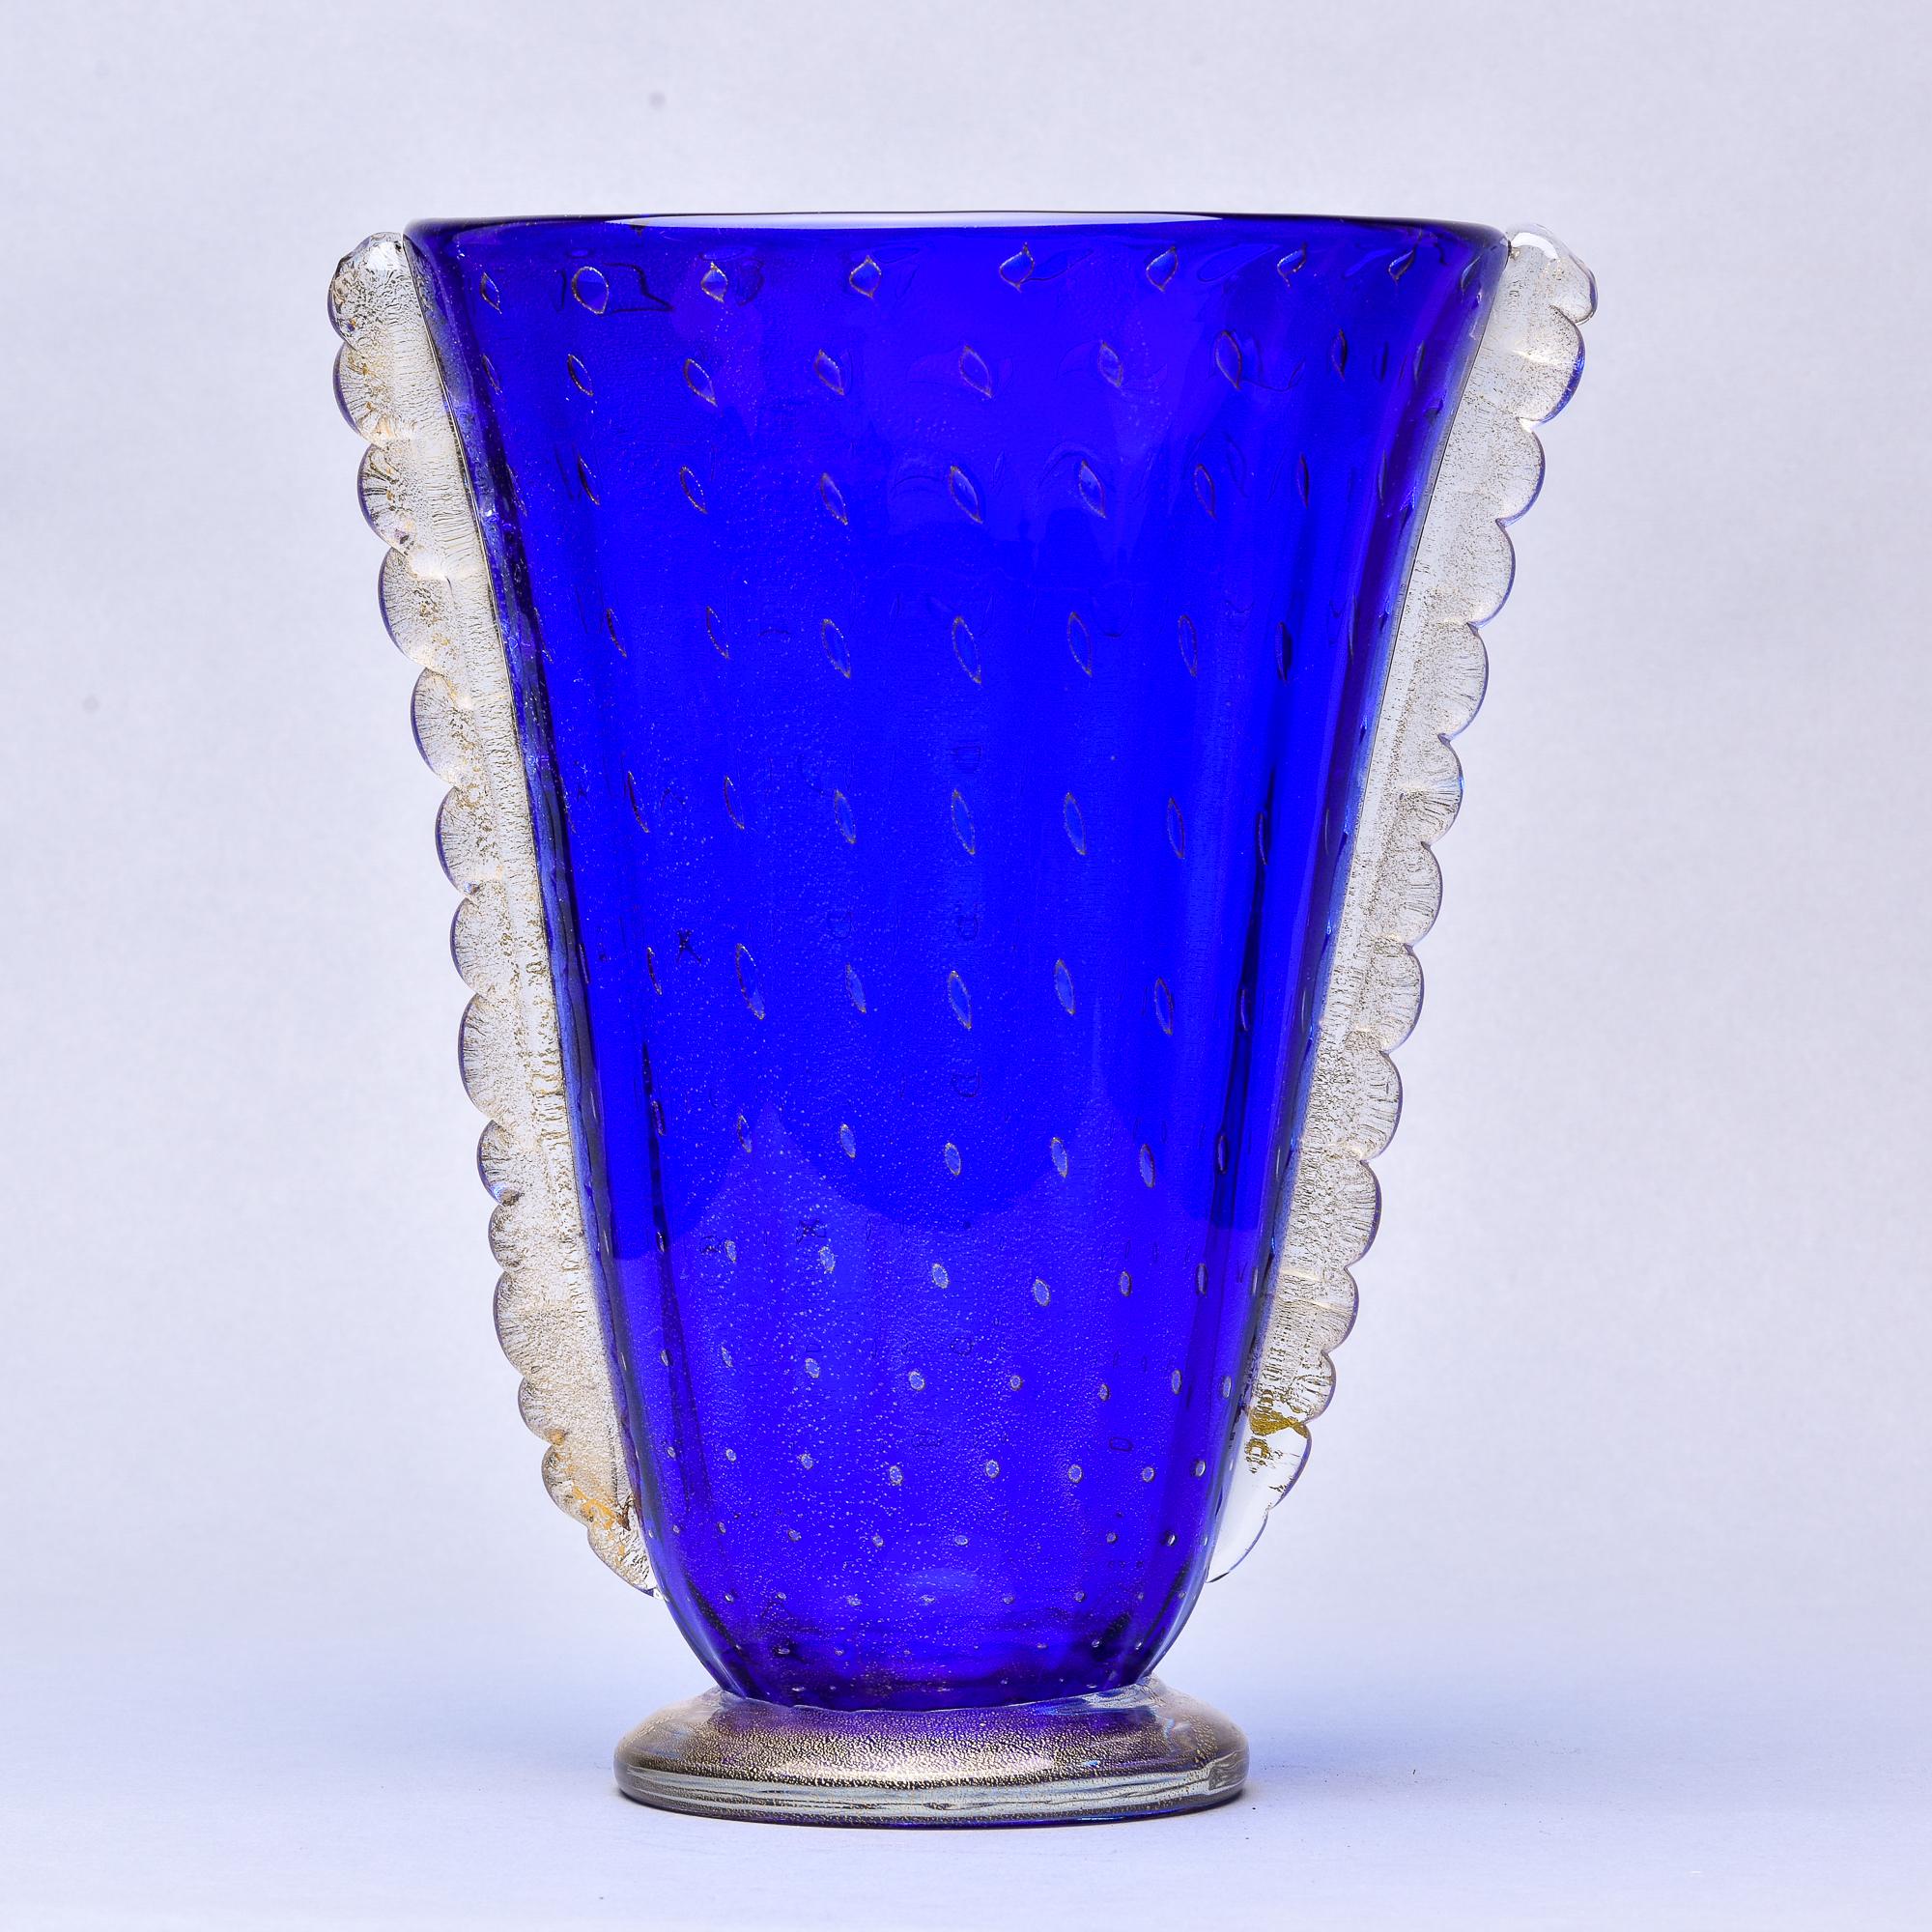 Found in Italy, this circa 1950s blue Murano glass vase has a flared body with contrasting decorative side fins and is attributed to Barovier. Base and sides are made of clear glass with gold inclusions. Body of vessel is saturated blue with